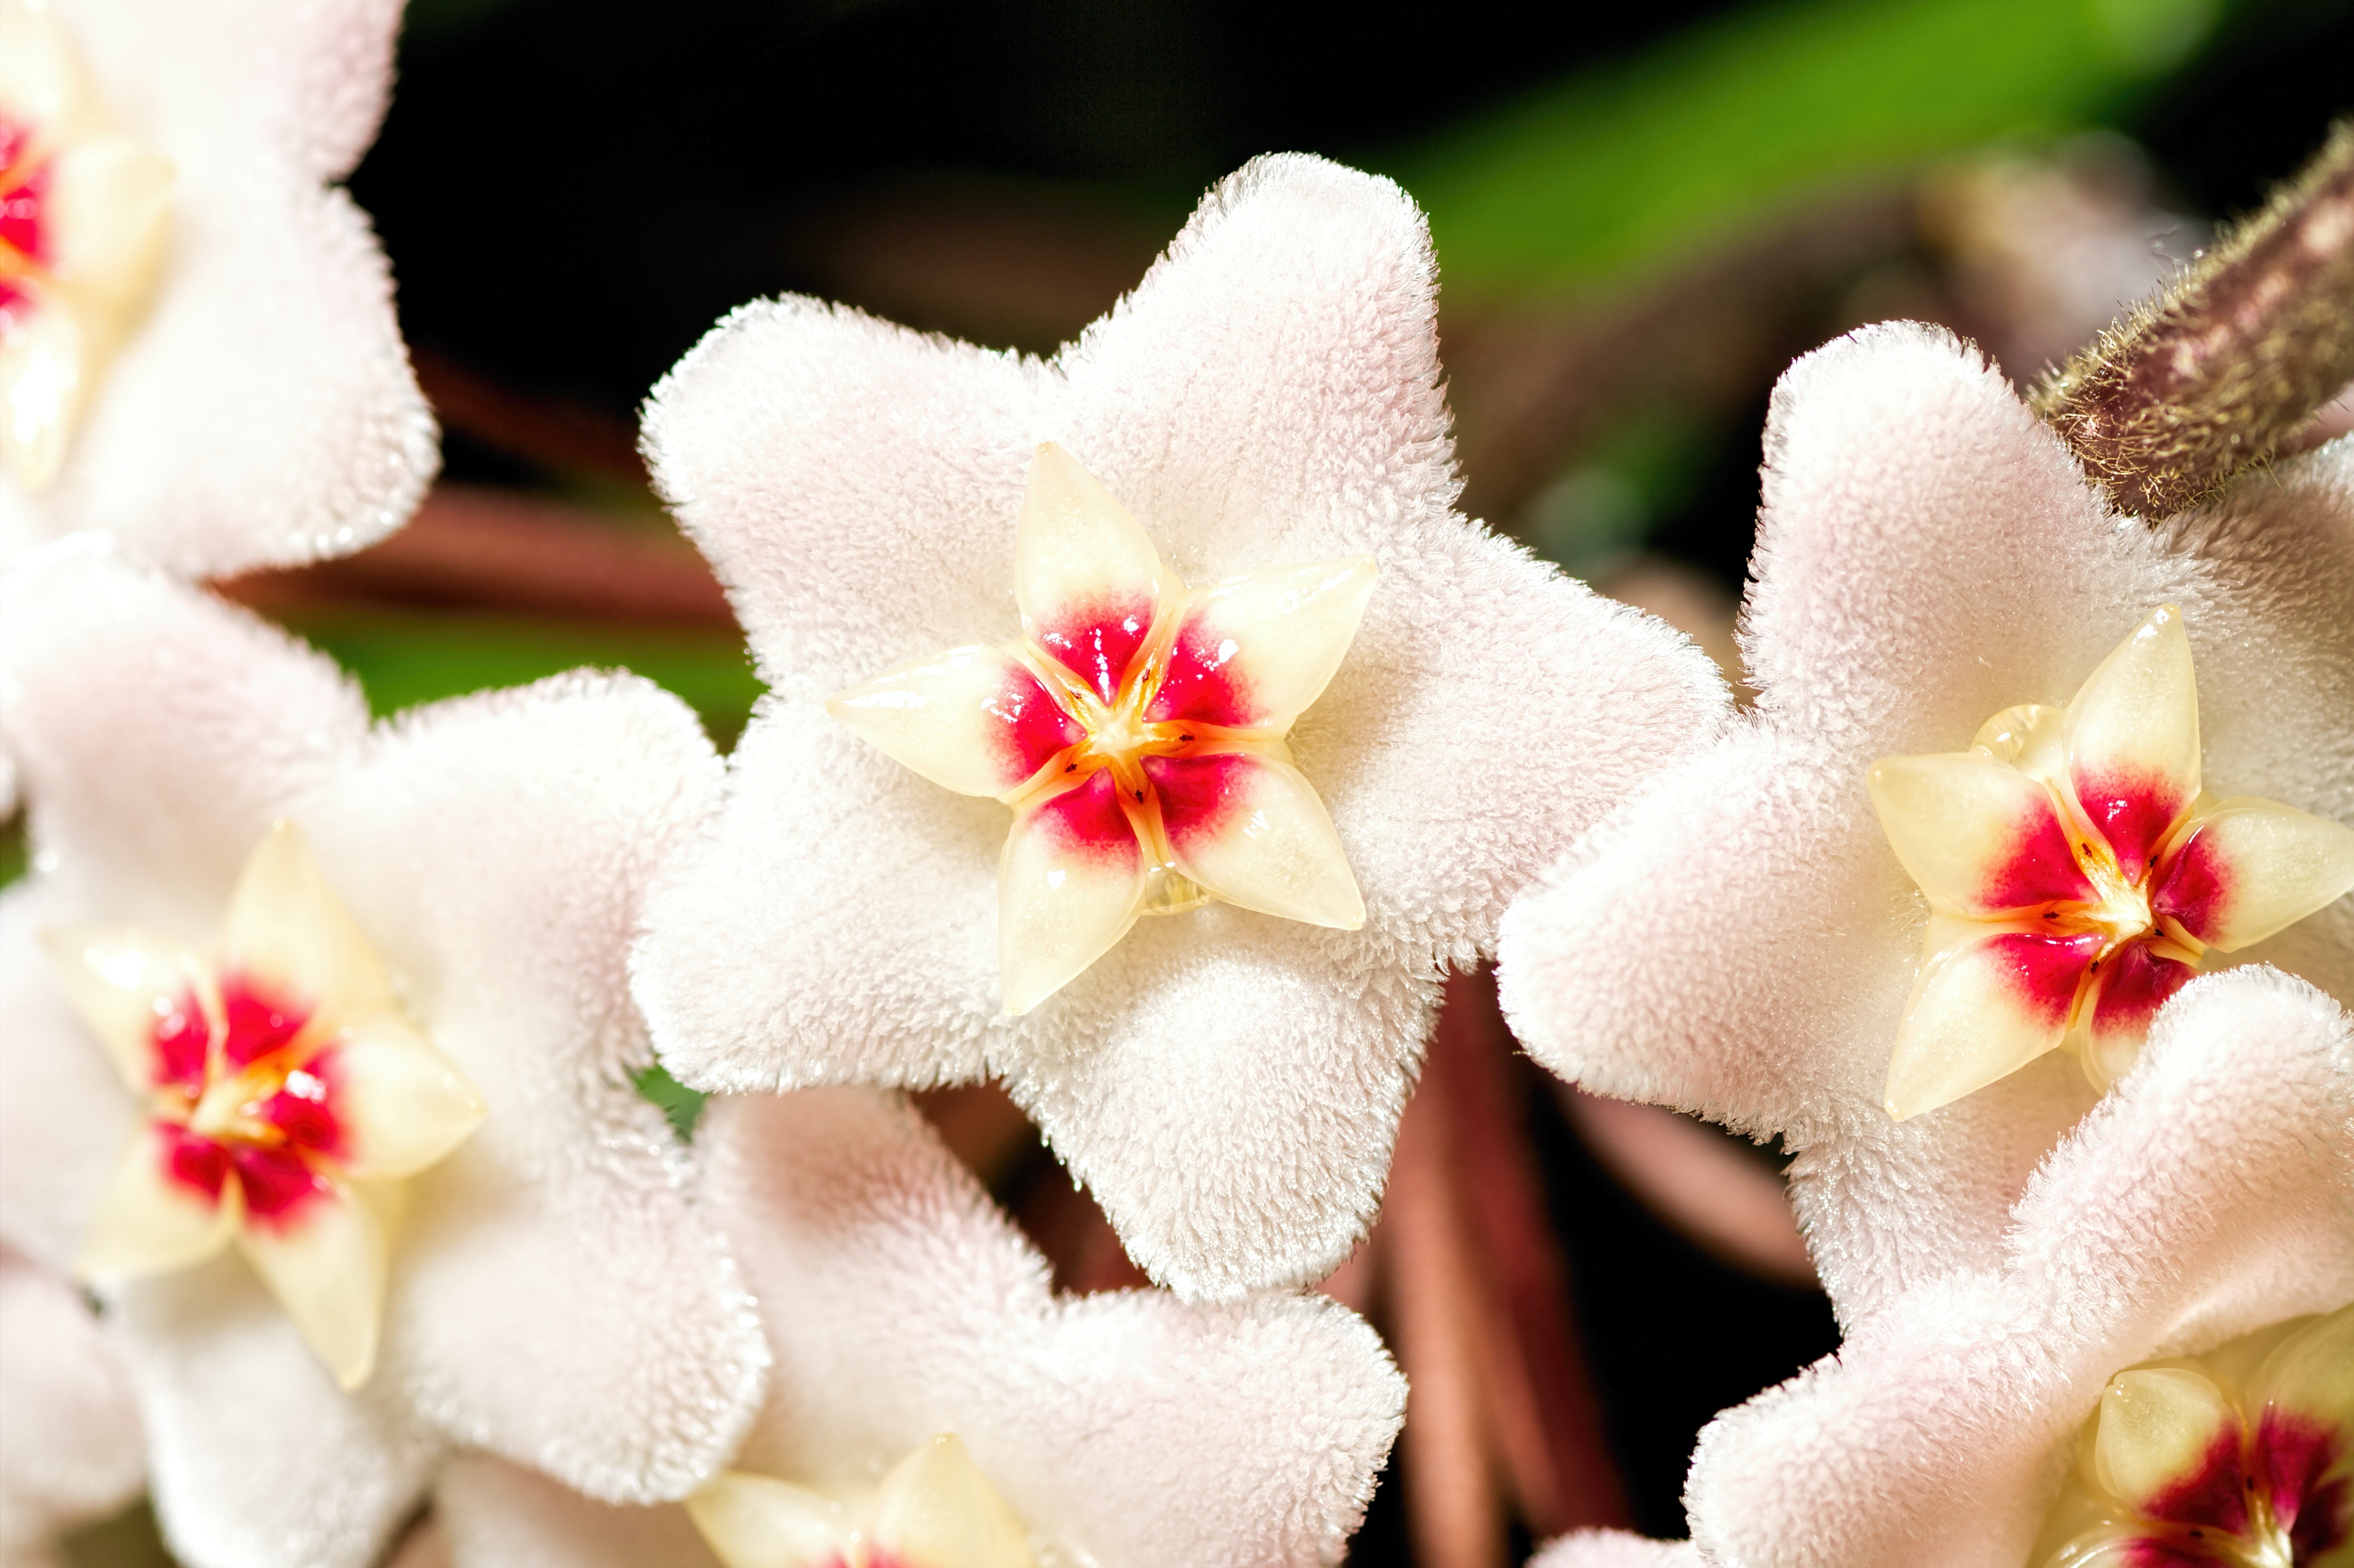 A closeup photo of white and pink hoya flowers.